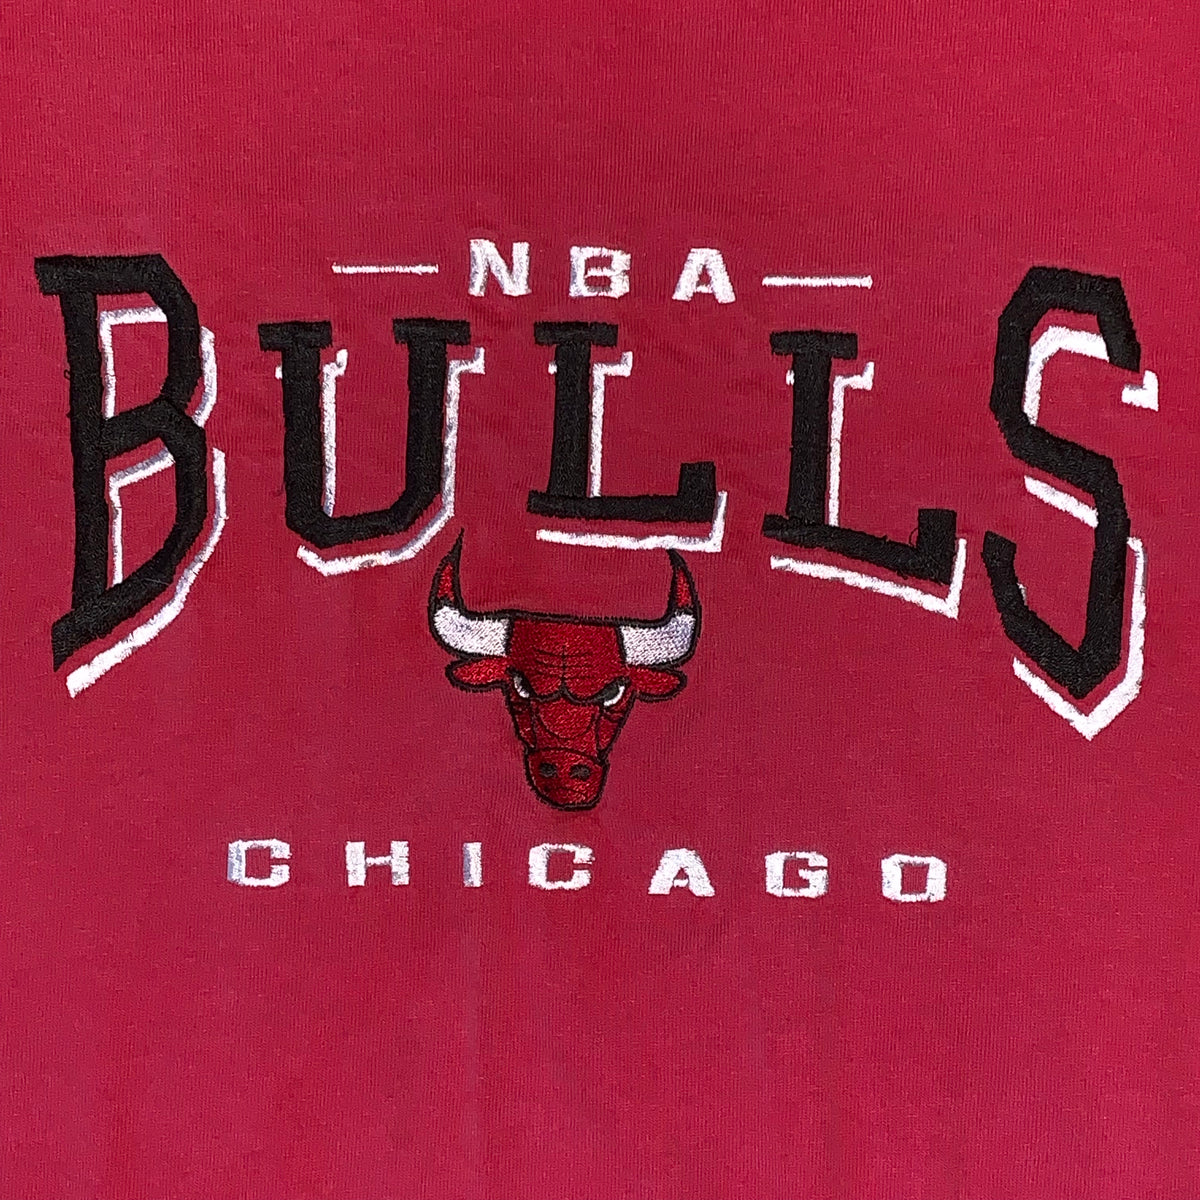 Chicago Bulls Embroidered Sweatshirt - Small – The Vintage Store